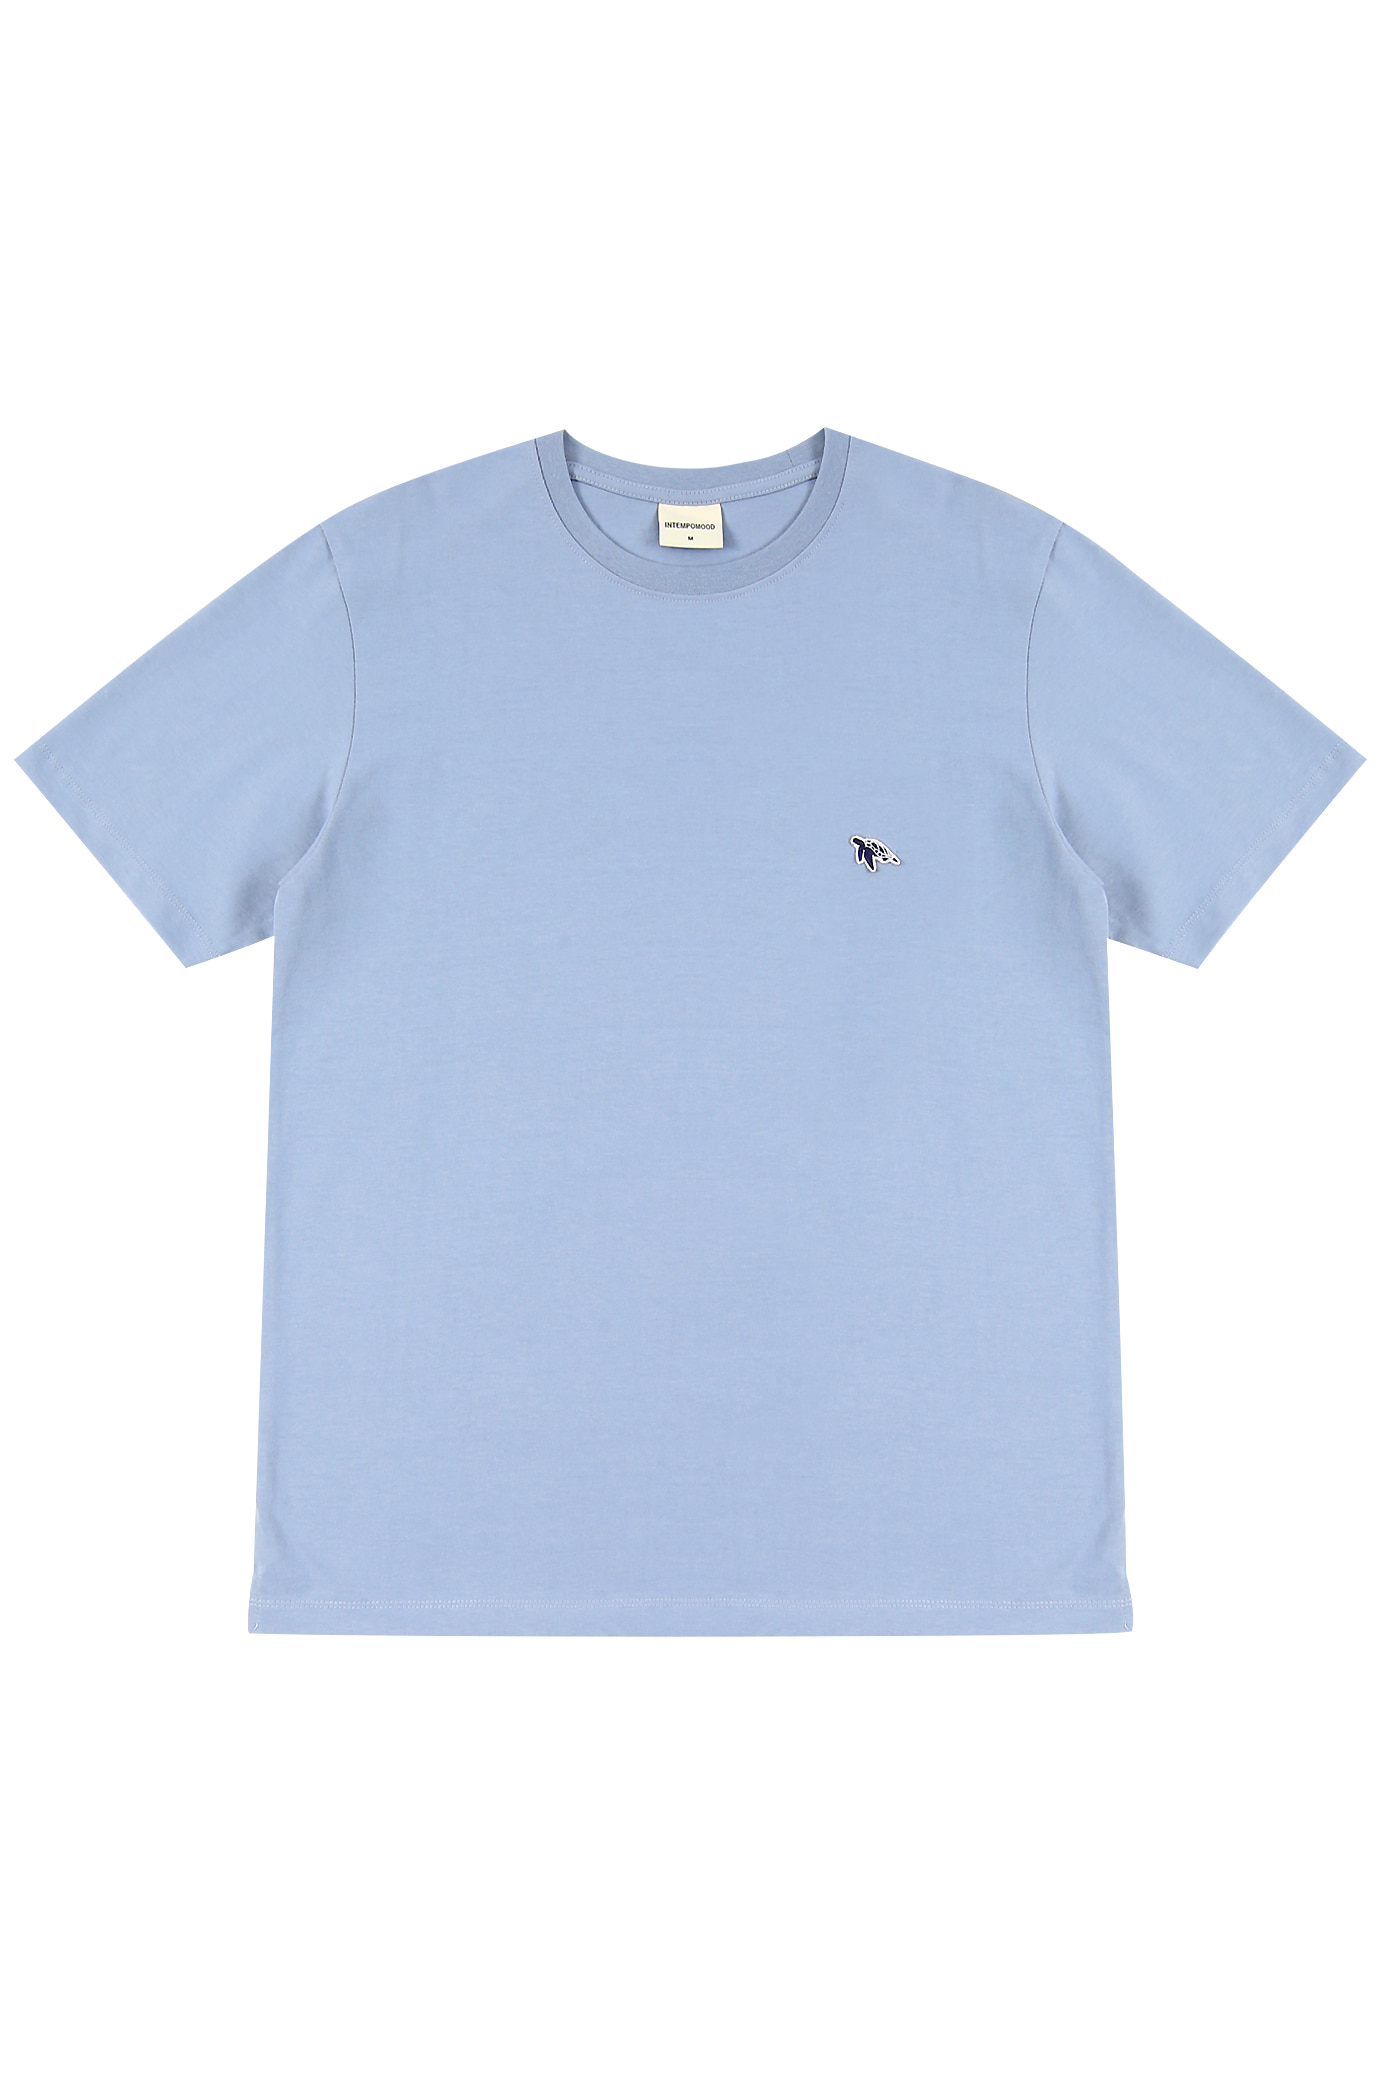 Turtle Patches T-shirt_Steel blue